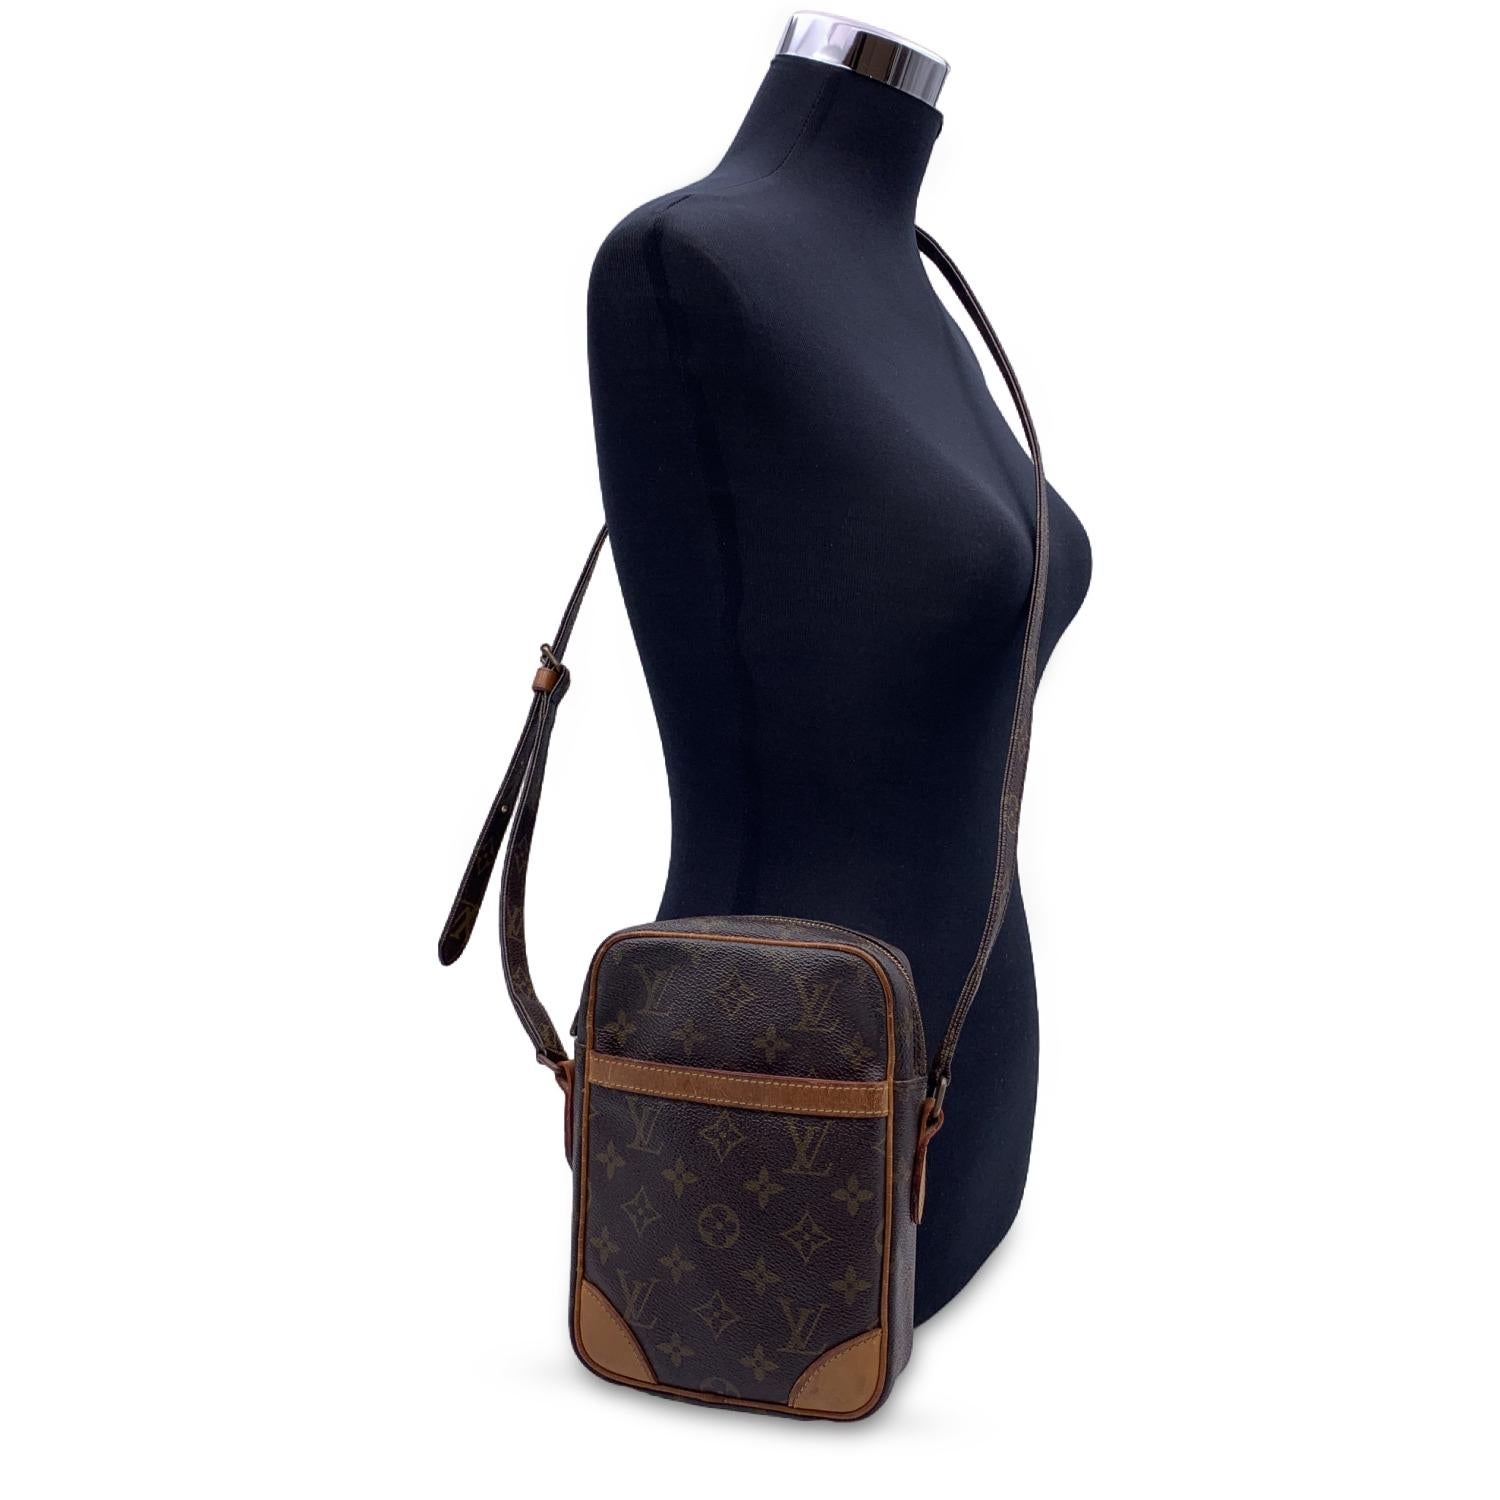 Stylish DANUBE messenger bag by LOUIS VUITTON, crafted in timeless monogram canvas. The bag features tan leather trim, a front open pocket and gold metal hardware. Adjustable monogram canvas shoulder strap with shoulder pad. The top zipper opens to